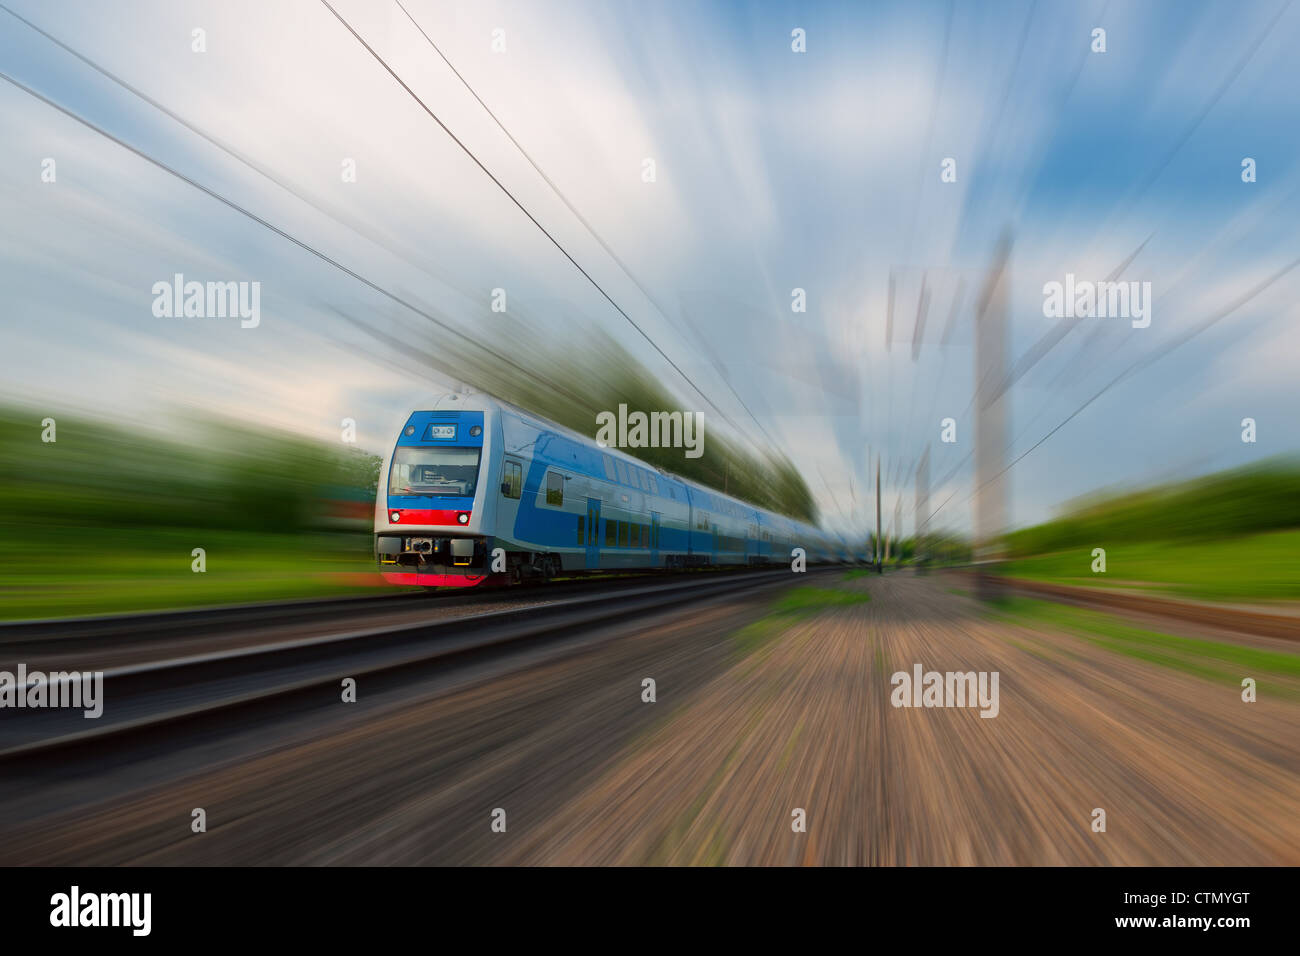 High-speed commuter train with motion blur Stock Photo